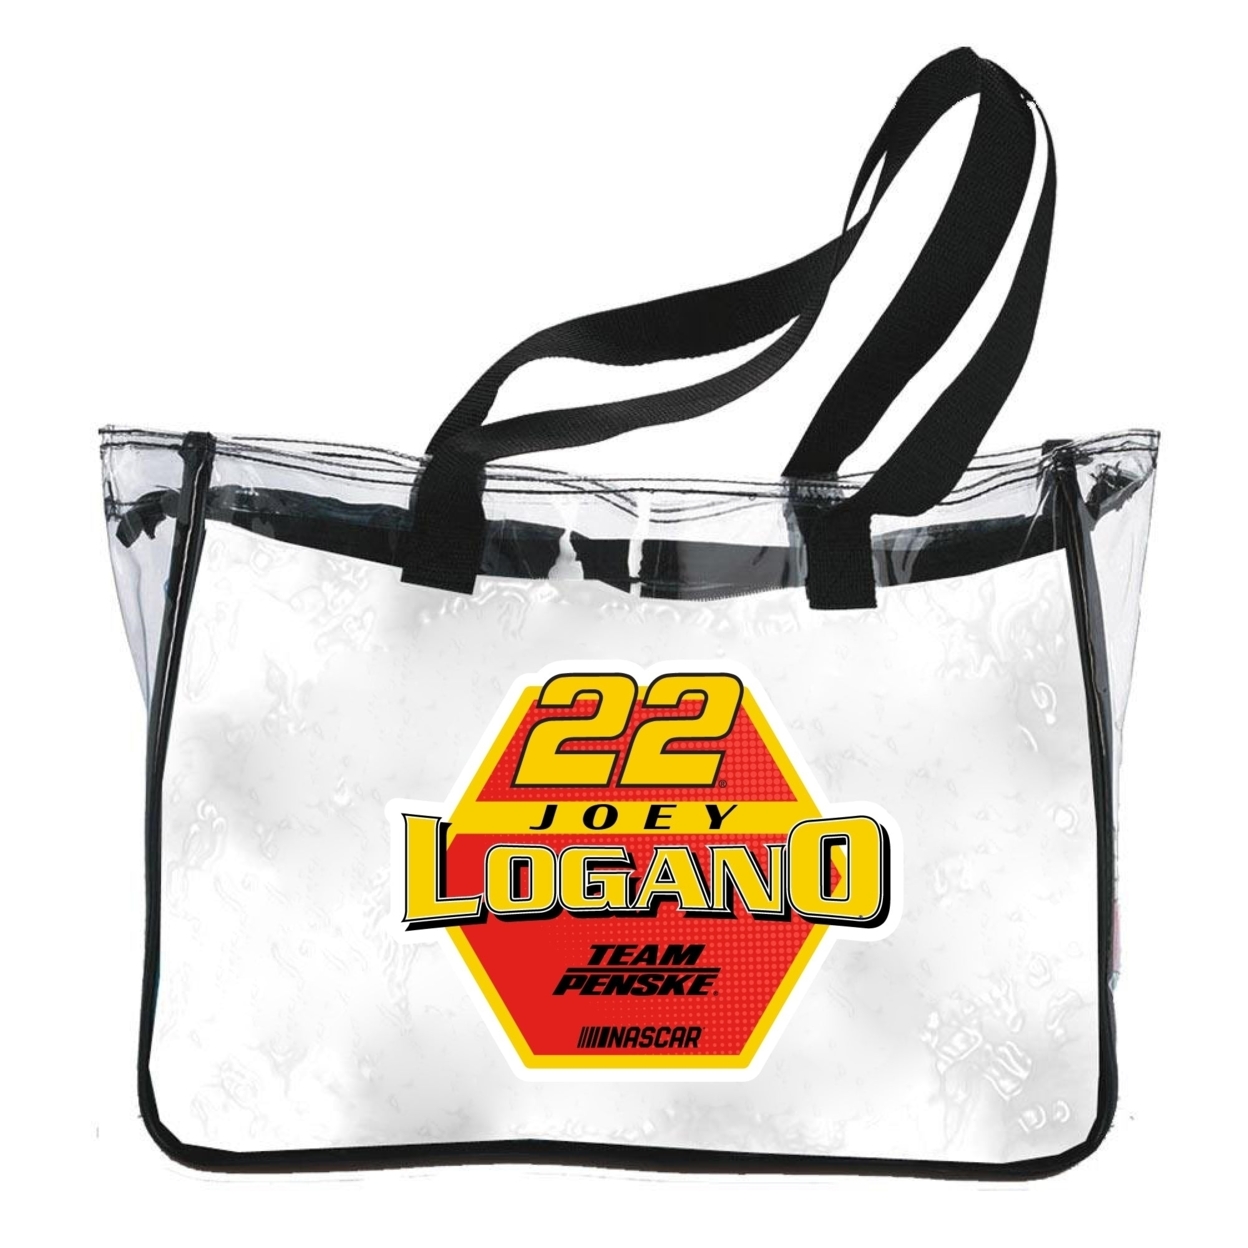 Joey Logano #22 Nascar Clear Tote Bag New For 2022